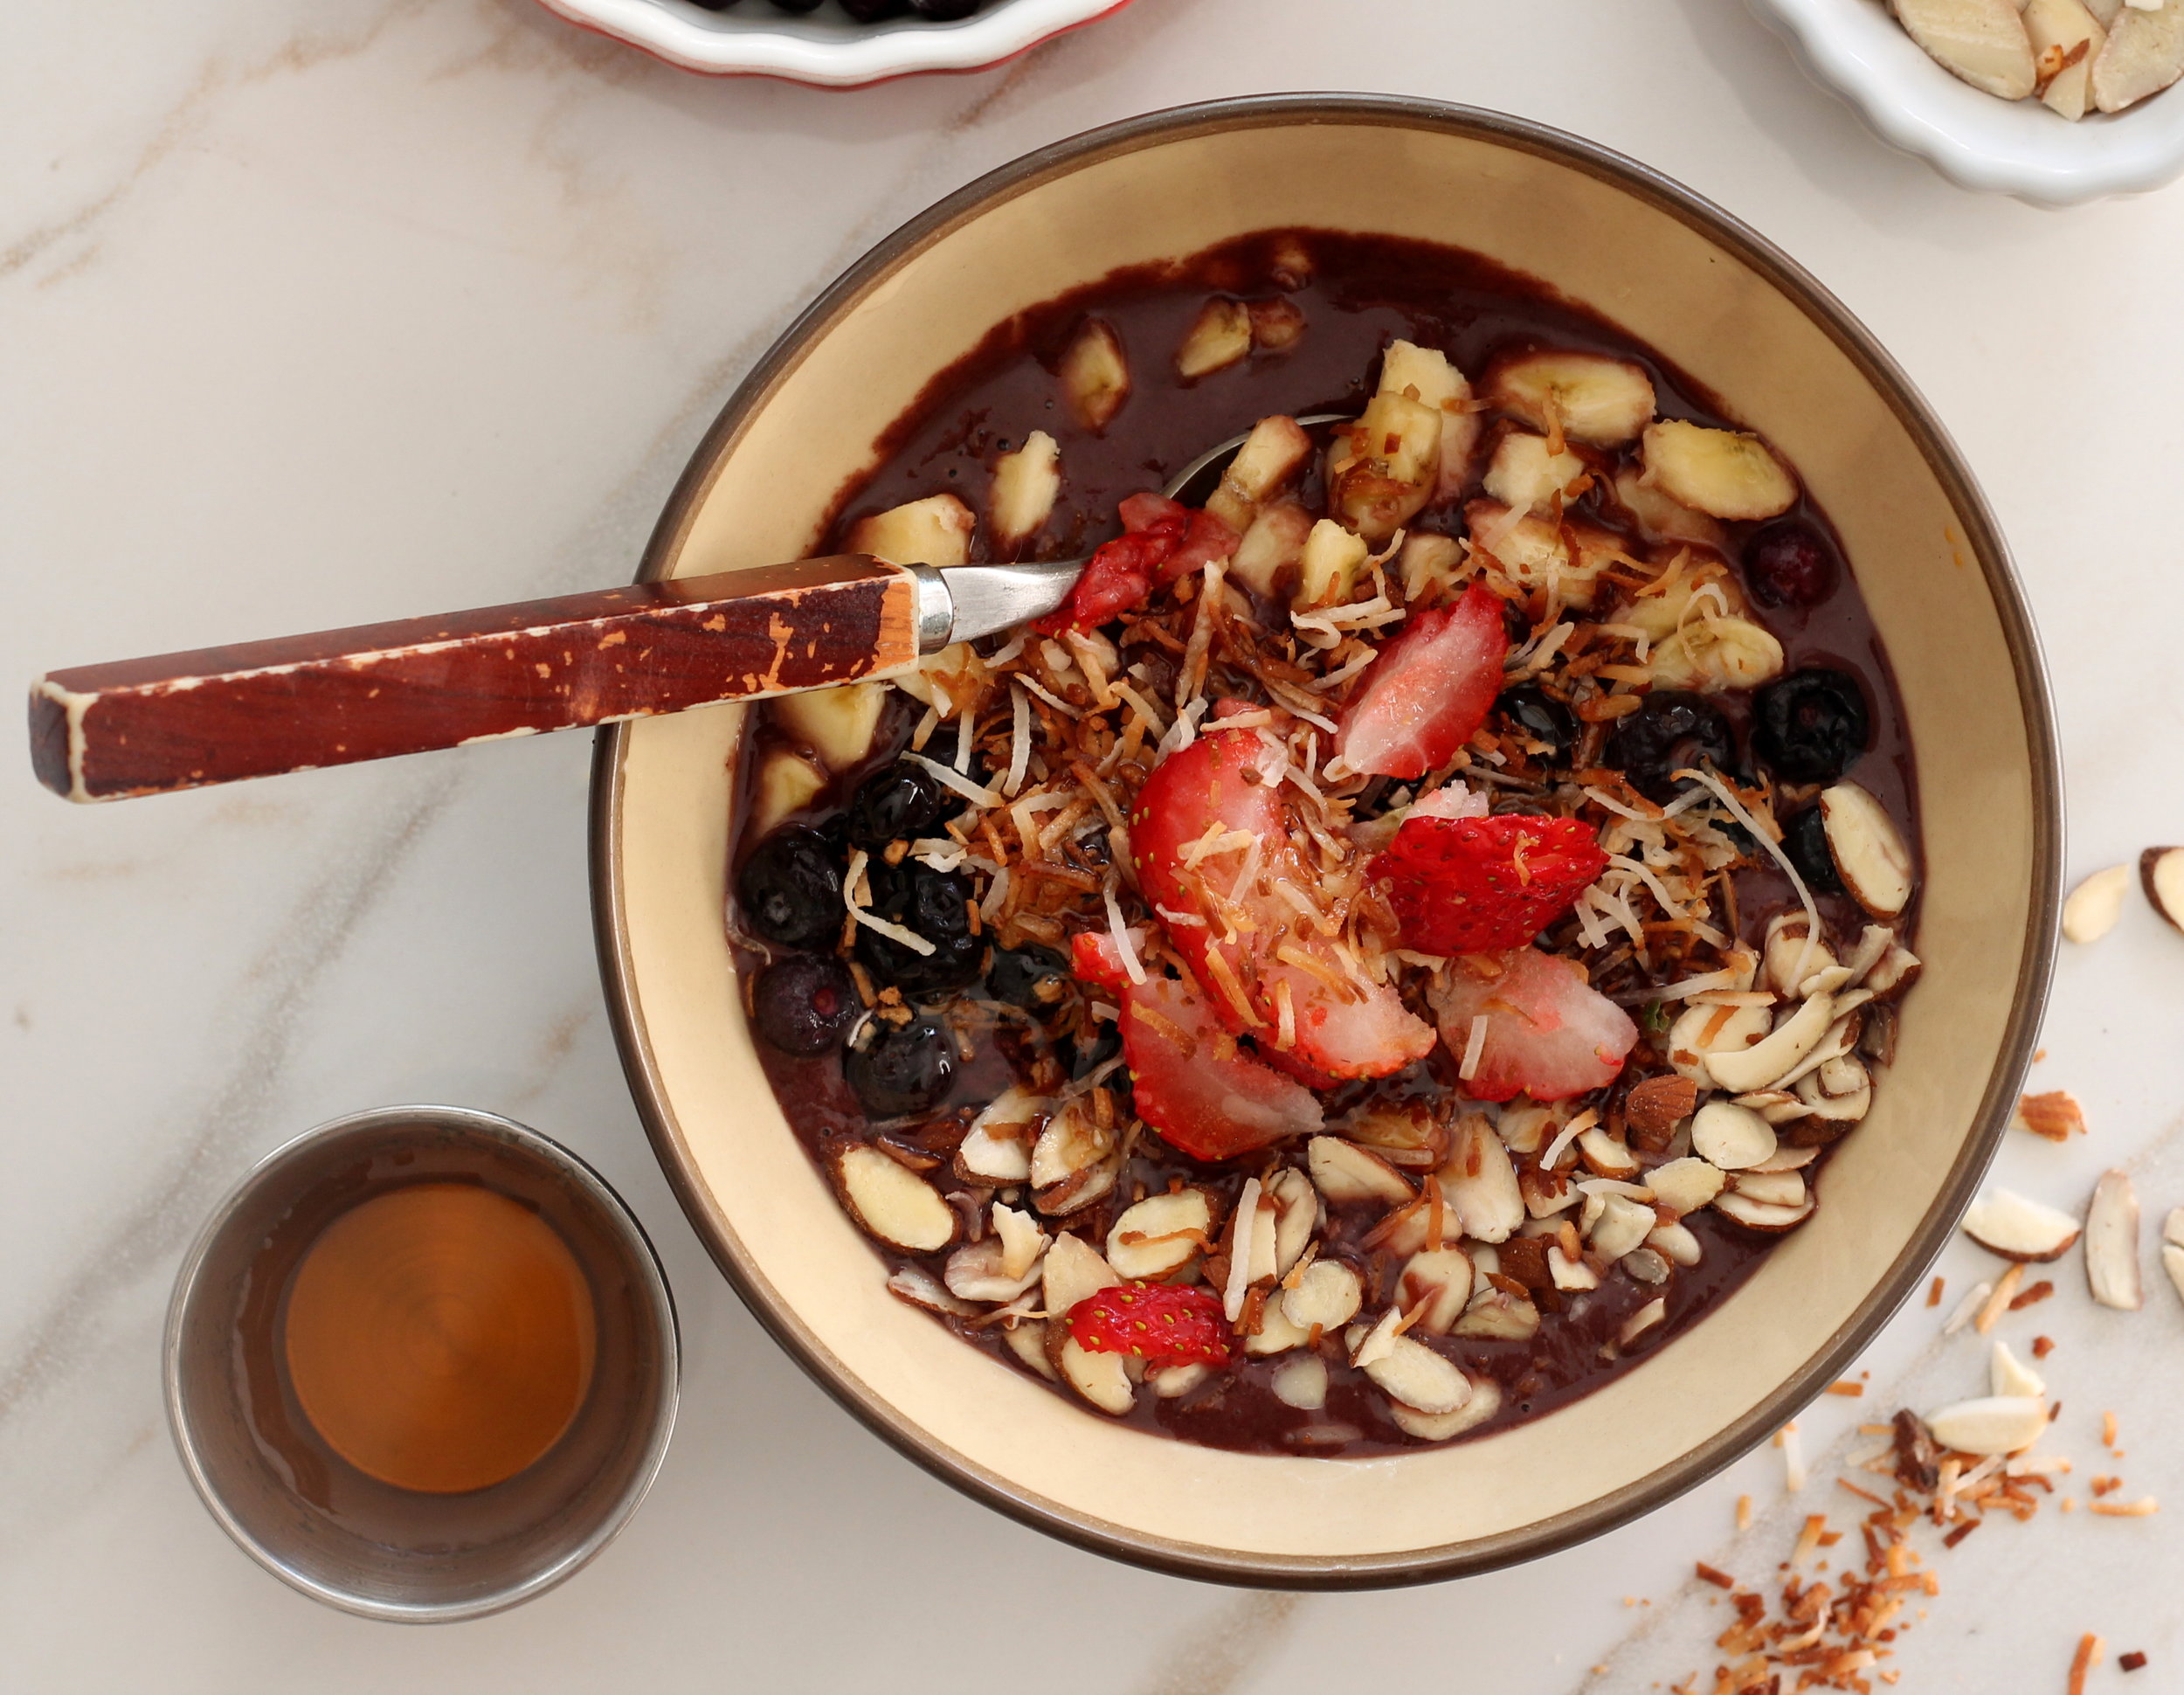 acai-bowl-with-fruits-and-nuts.jpg